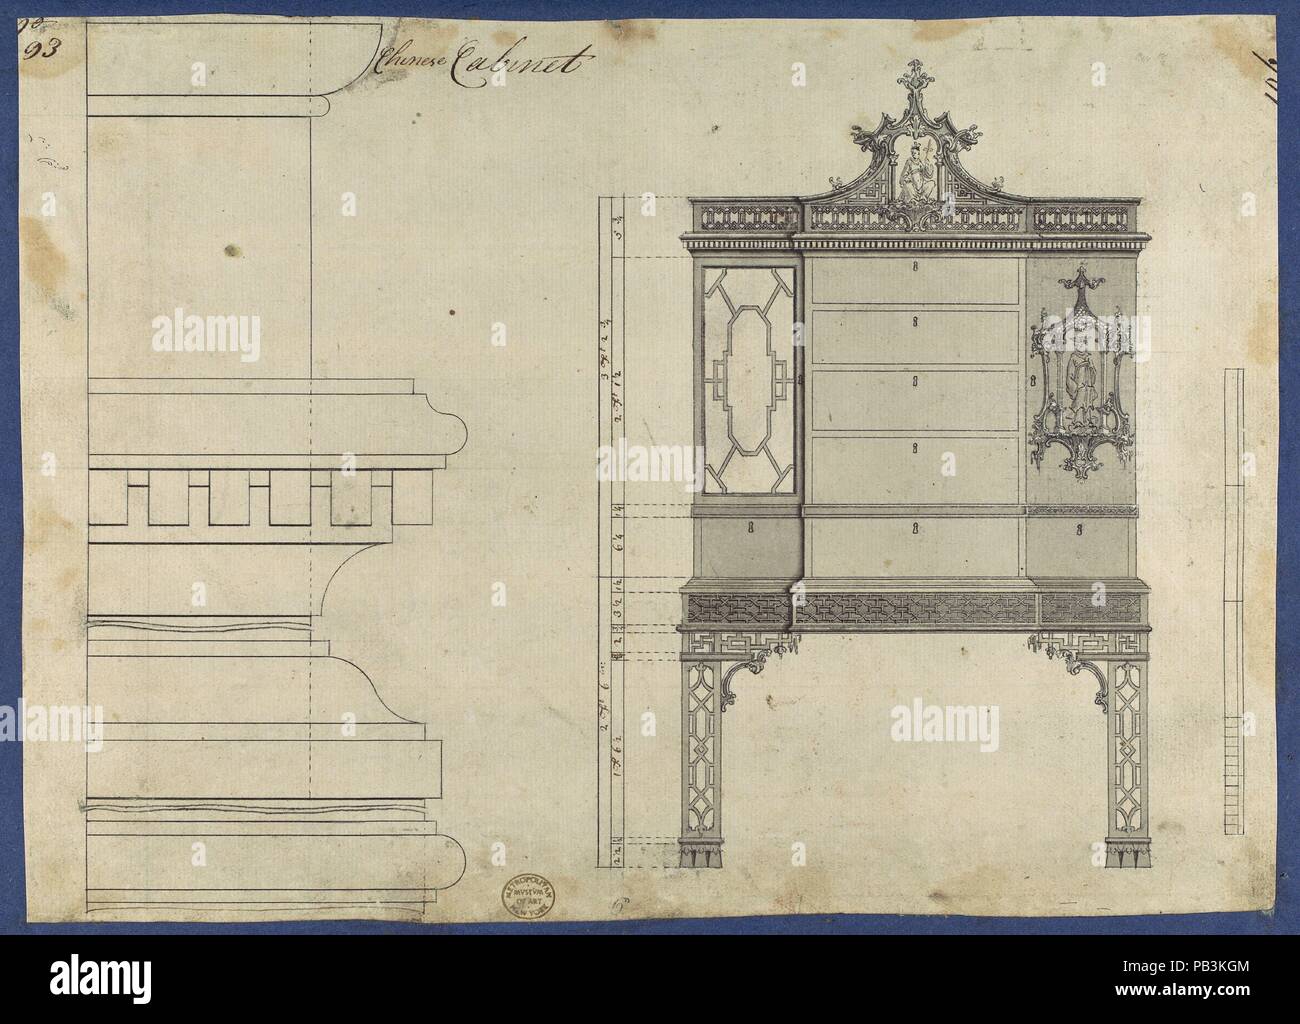 Chinese Cabinet, from Chippendale Drawings, Vol. II. Artist: Thomas Chippendale (British, baptised Otley, West Yorkshire 1718-1779 London). Dimensions: sheet: 8 7/16 x 12 in. (21.4 x 30.4 cm). Published in: London. Date: 1754.  Preparatory drawing for Thomas Chippendale's 'Gentleman and Cabinet Maker's Director'. Published in reverse as plate XCIII in the 1754 and 1755 editions, renumbered as plate CXXIII in the 1762 edition. Museum: Metropolitan Museum of Art, New York, USA. Stock Photo